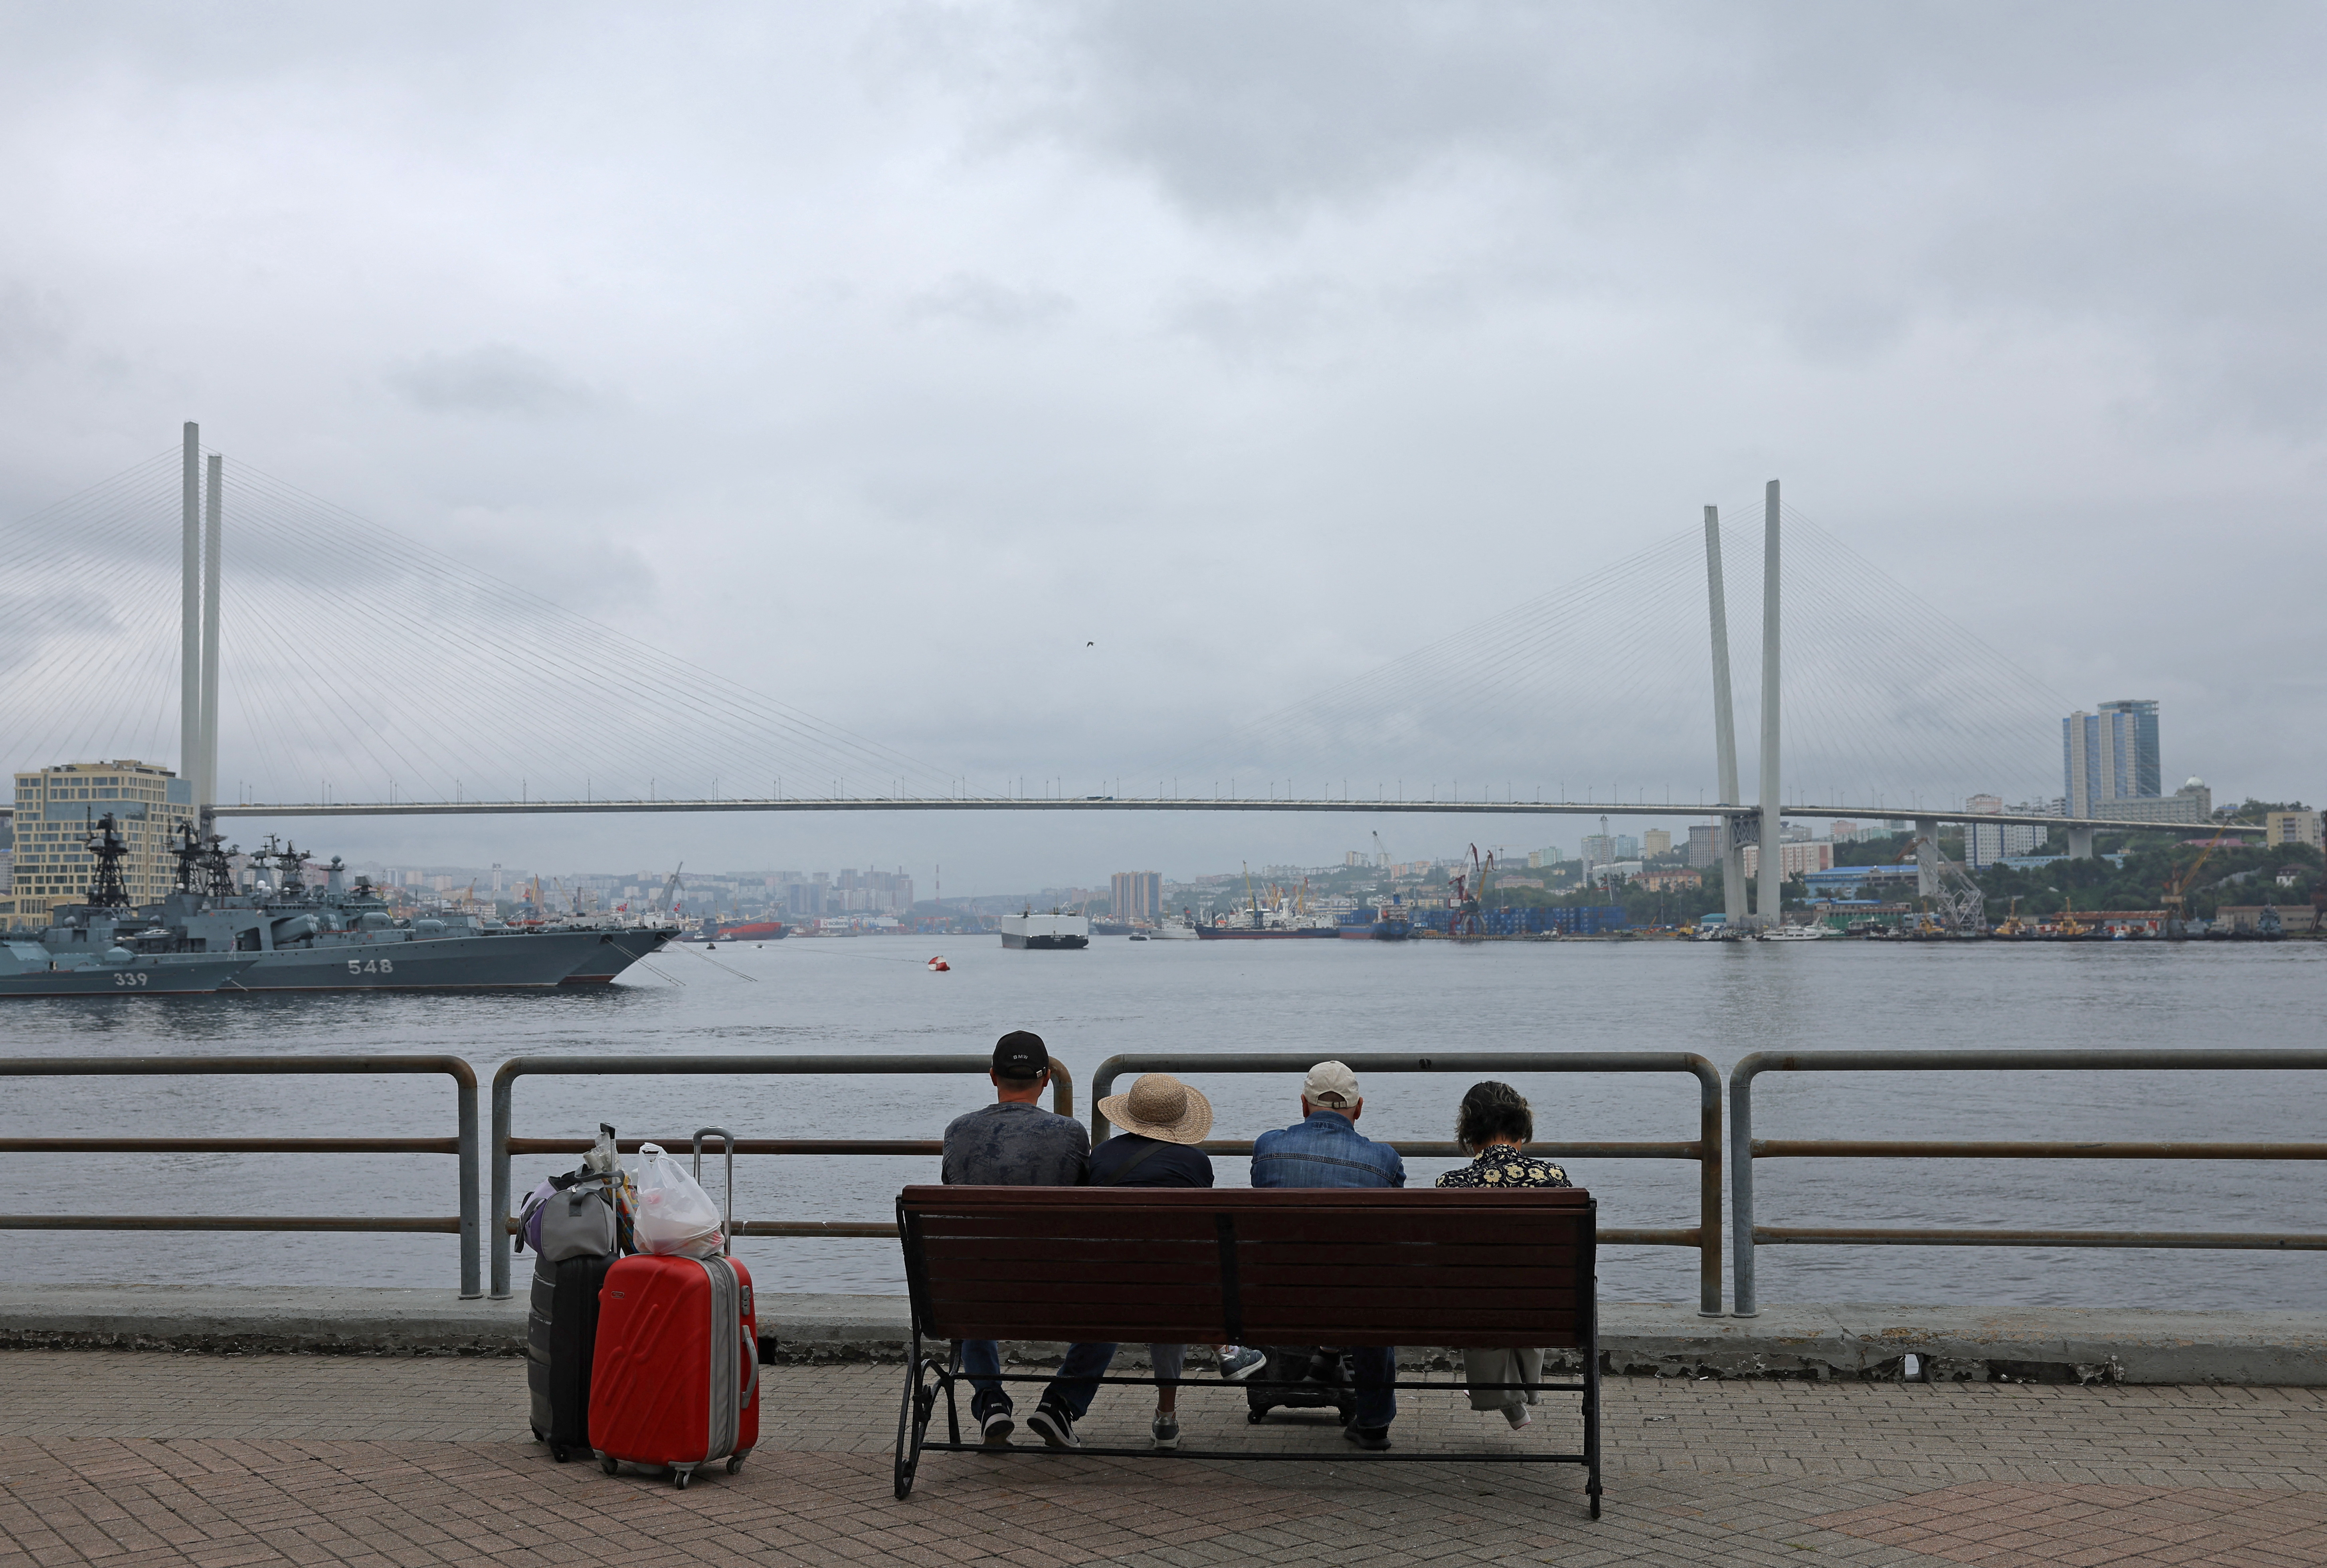 People sit on a bench on an embankment in Vladivostok